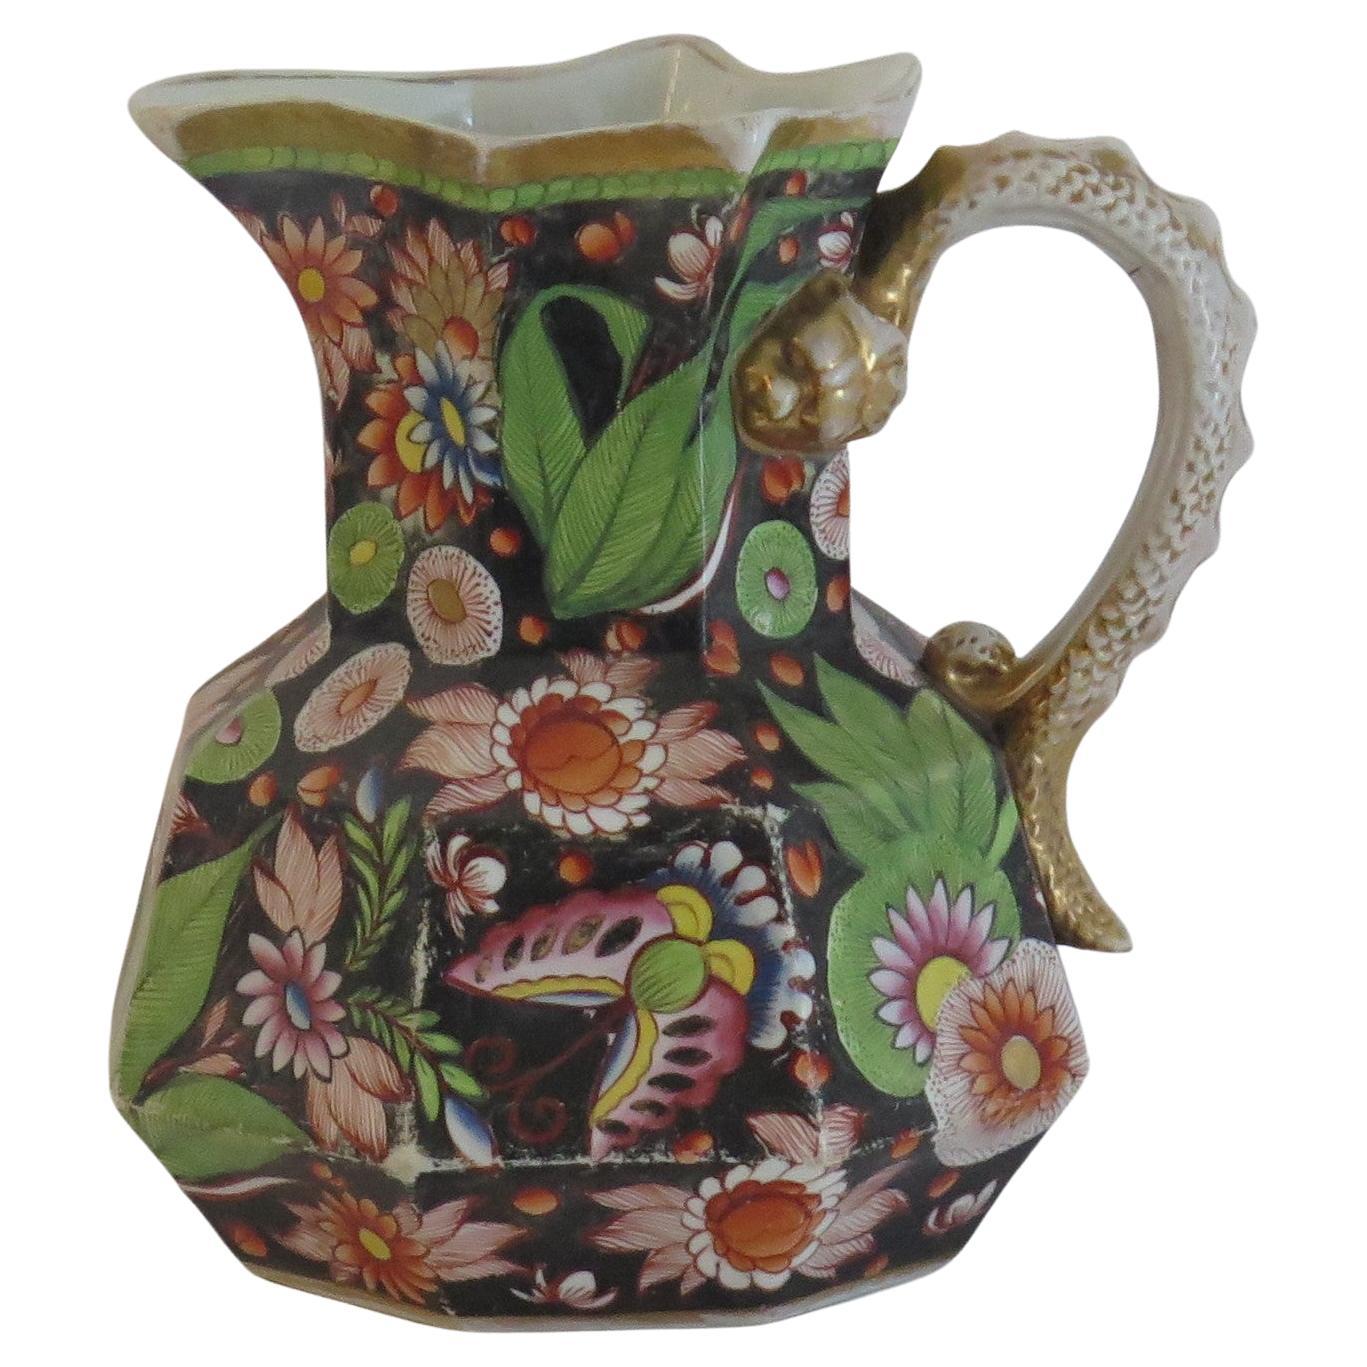 This is a Large hand-painted Mason's ironstone jug or pitcher, in the very rare Butterflies & Flowers gilded pattern, from their earliest George 3rd period, circa 1815. 

The jug is well potted in their octagonal 